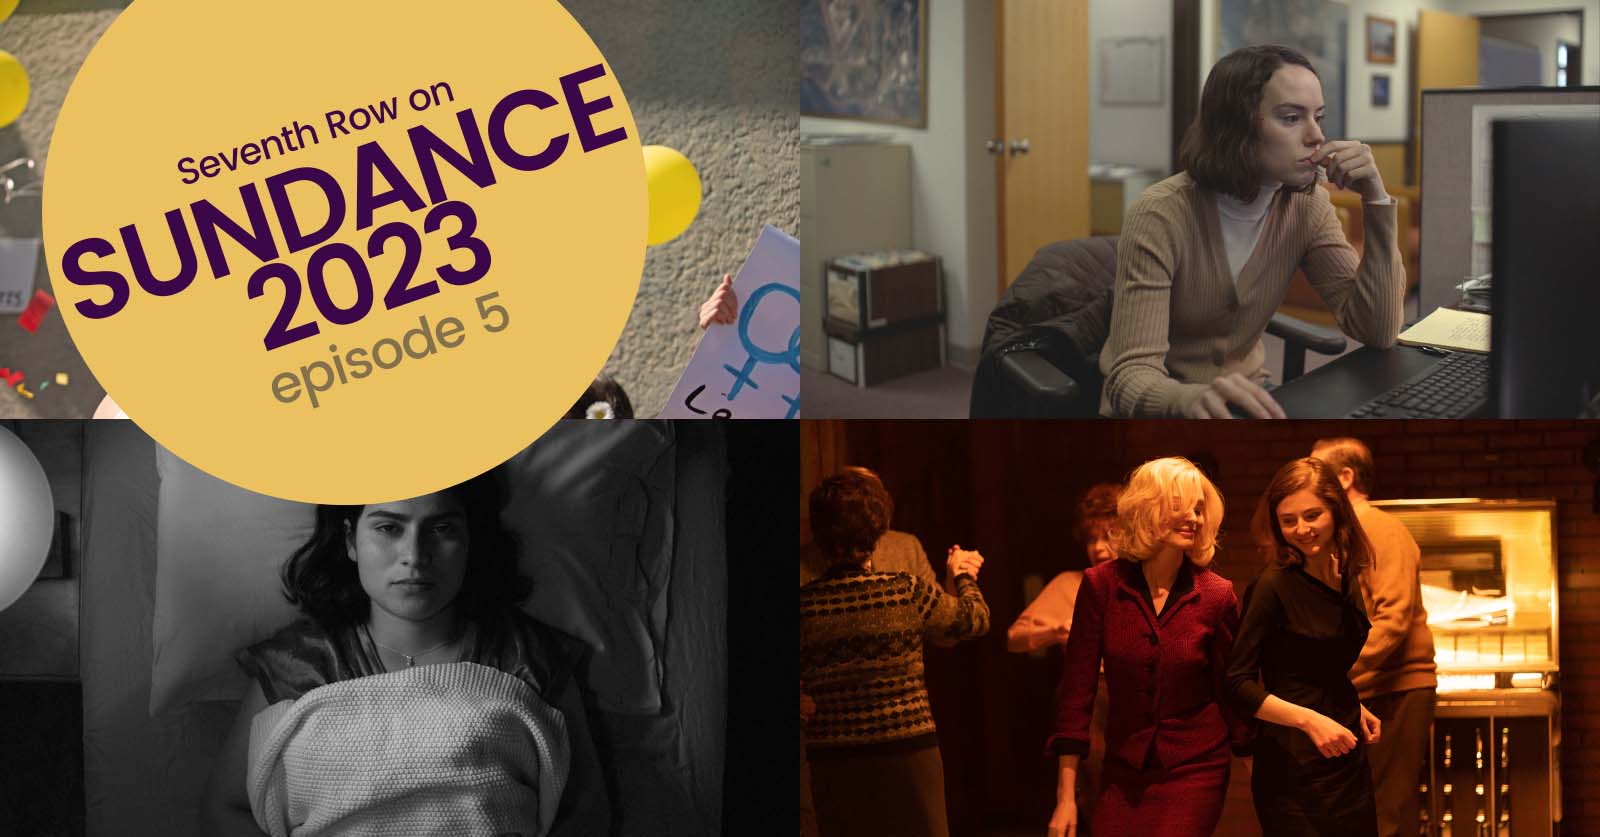 Clockwise from top left: Stills from the films Fairyland, Sometimes I Think about Dying, Fremont, and Eileen. Sundance 2023 Episode 5 header image. 